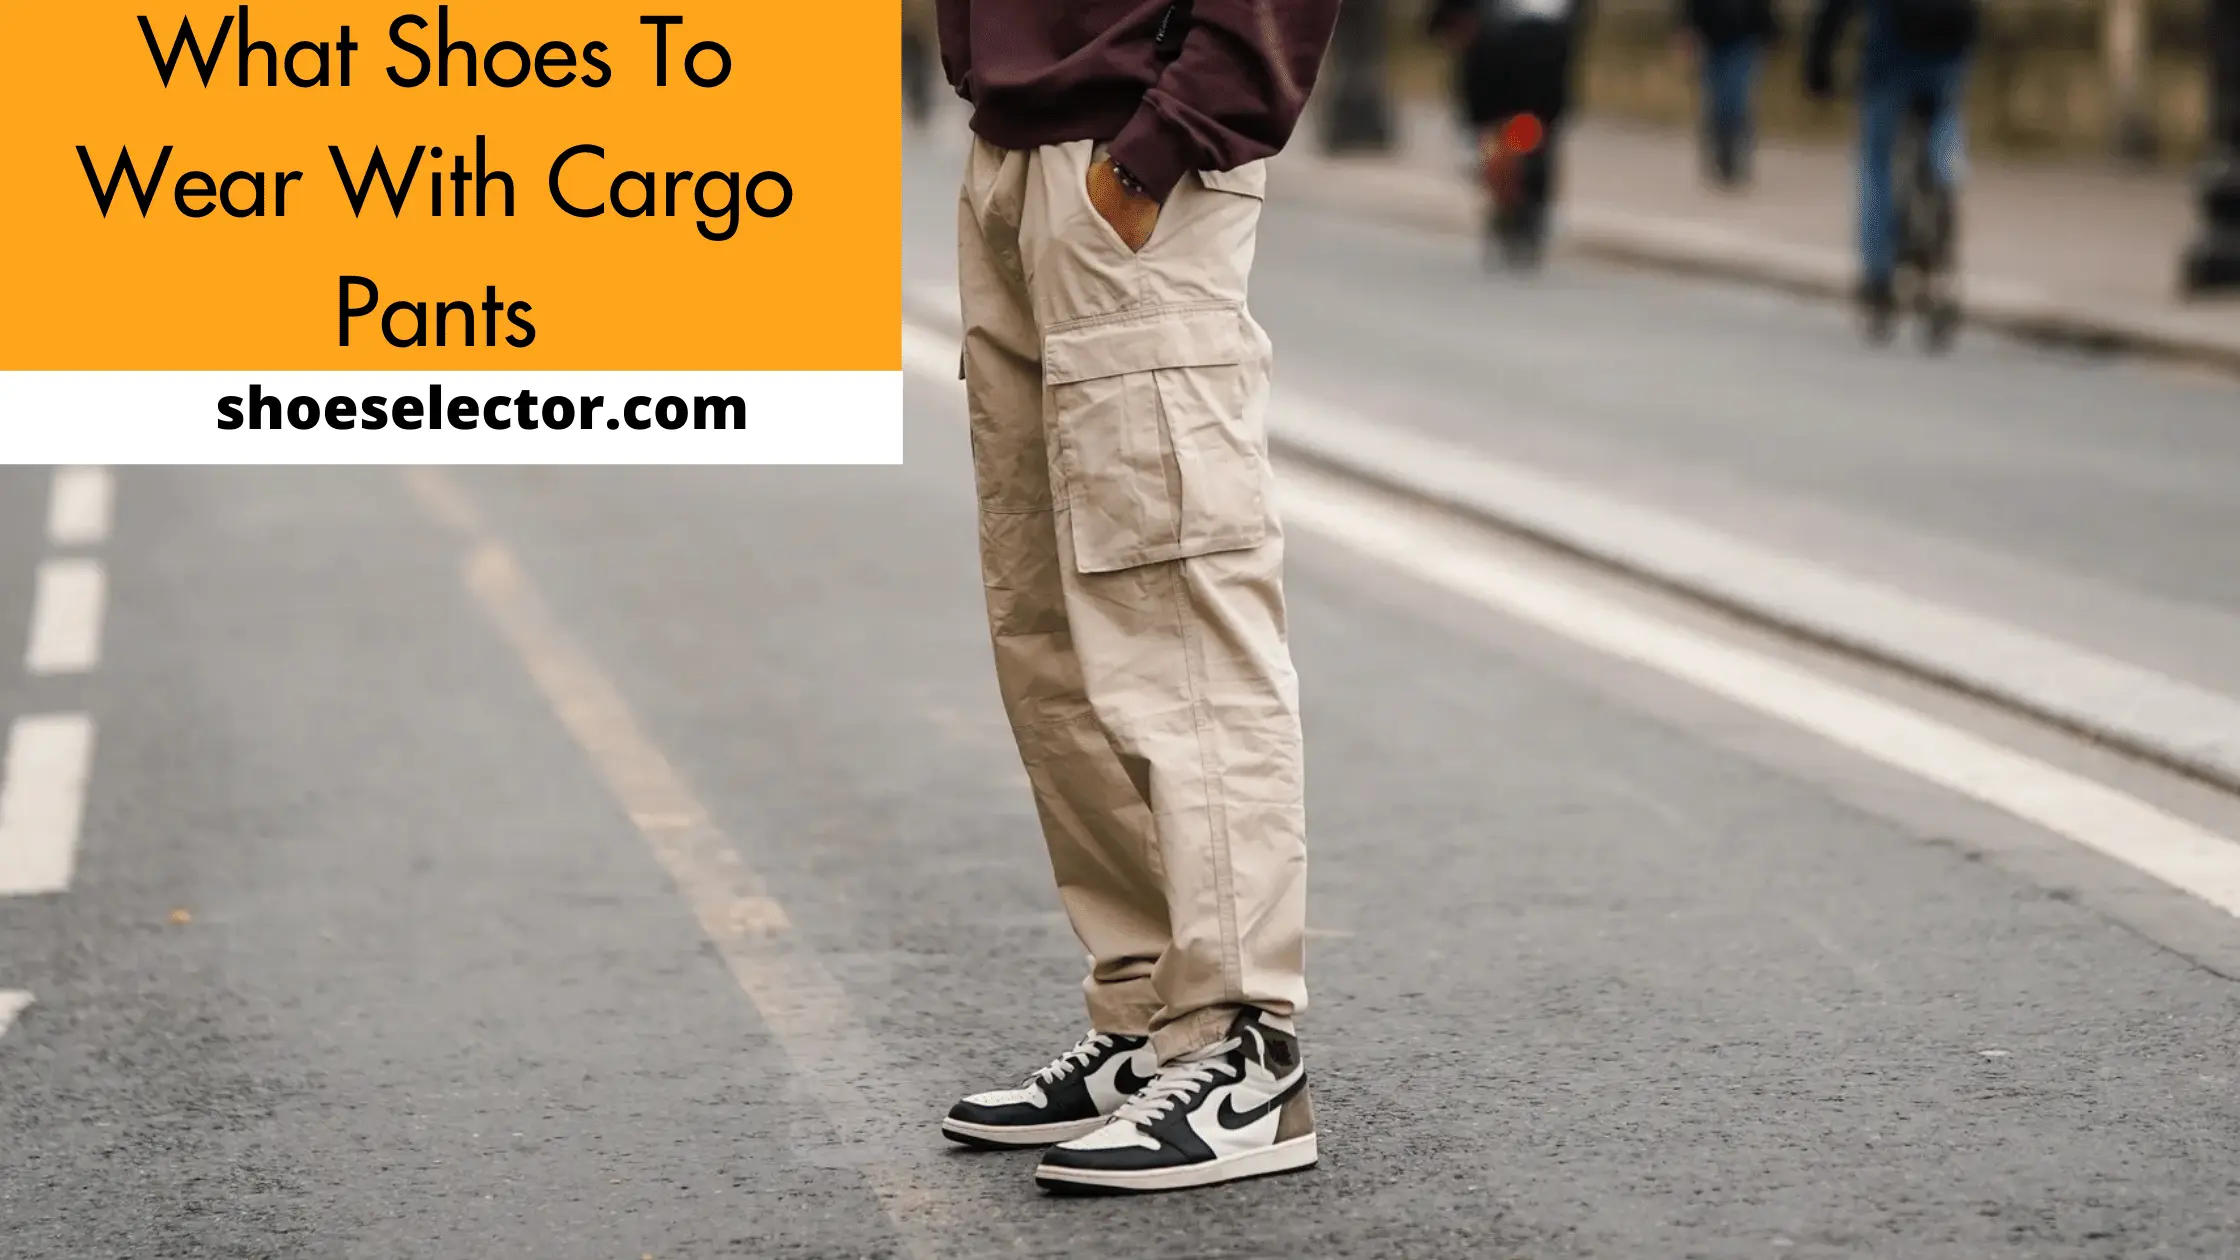 What Shoes To Wear With Cargo Pants? - #1 Solution